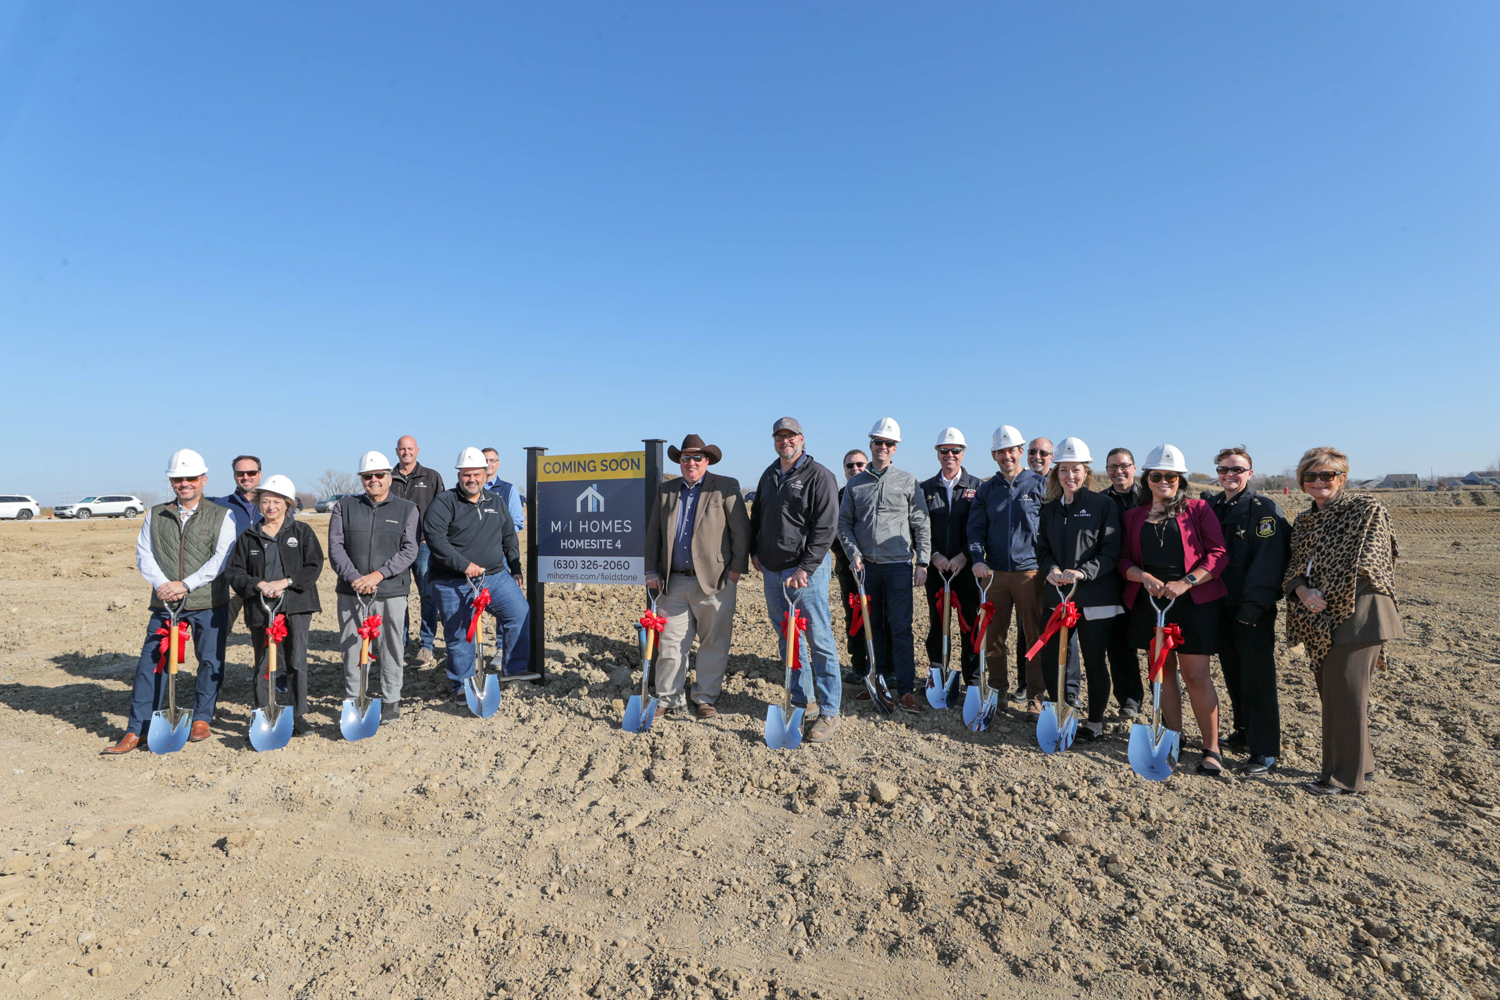 Representatives from MI Homes and the Village of Huntley gathered for a groundbreaking event marking the start of construction on two model homes at the new single-family home